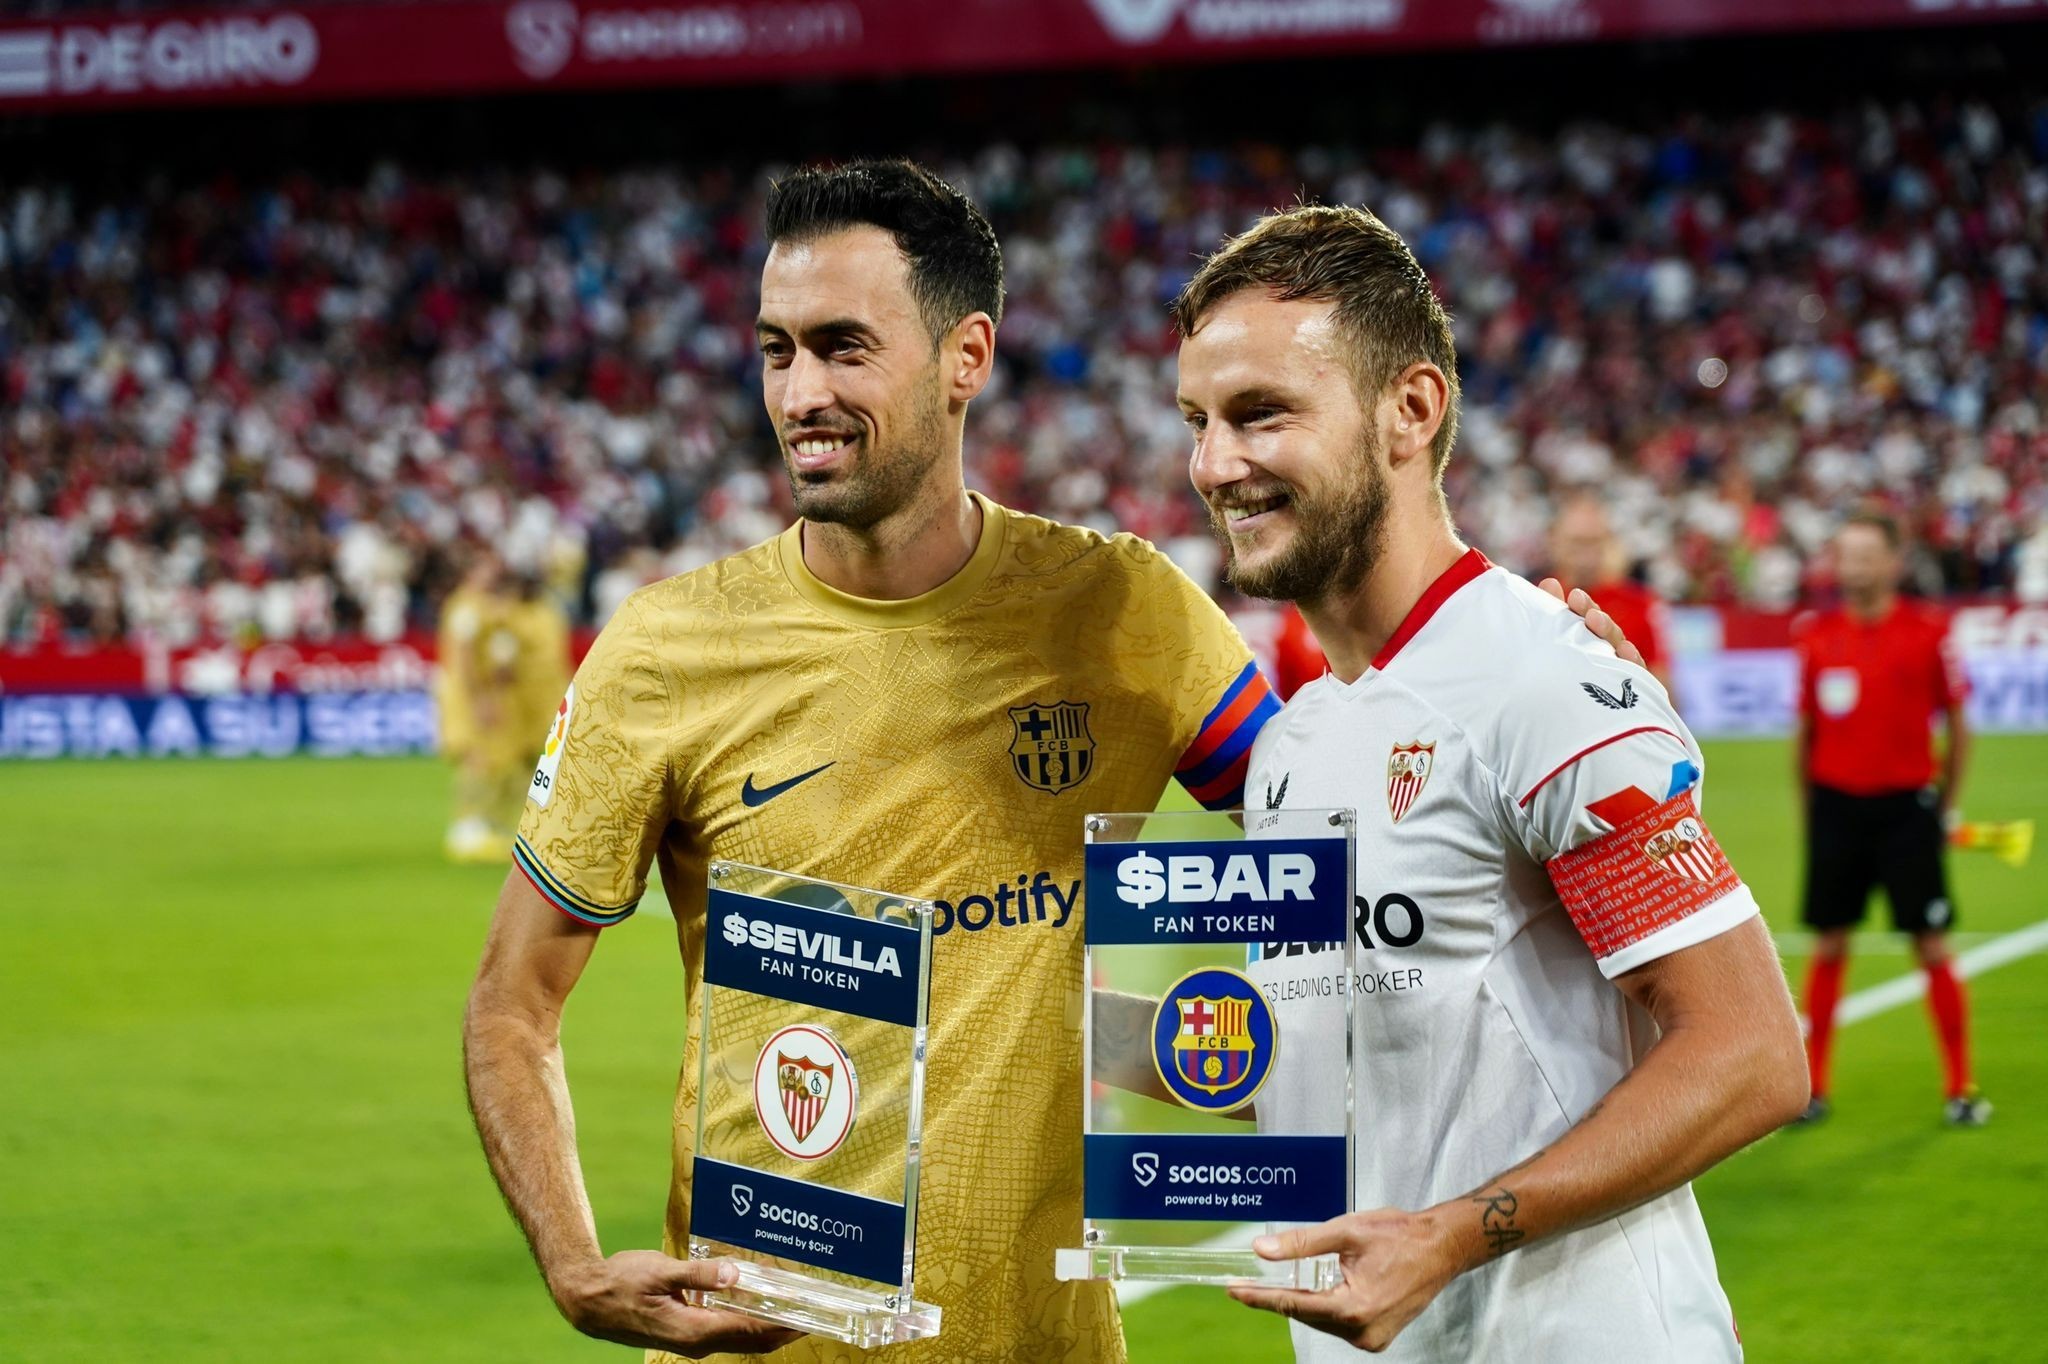 One step further: Fan Token holders meet the captains before Sevilla-Barcelona